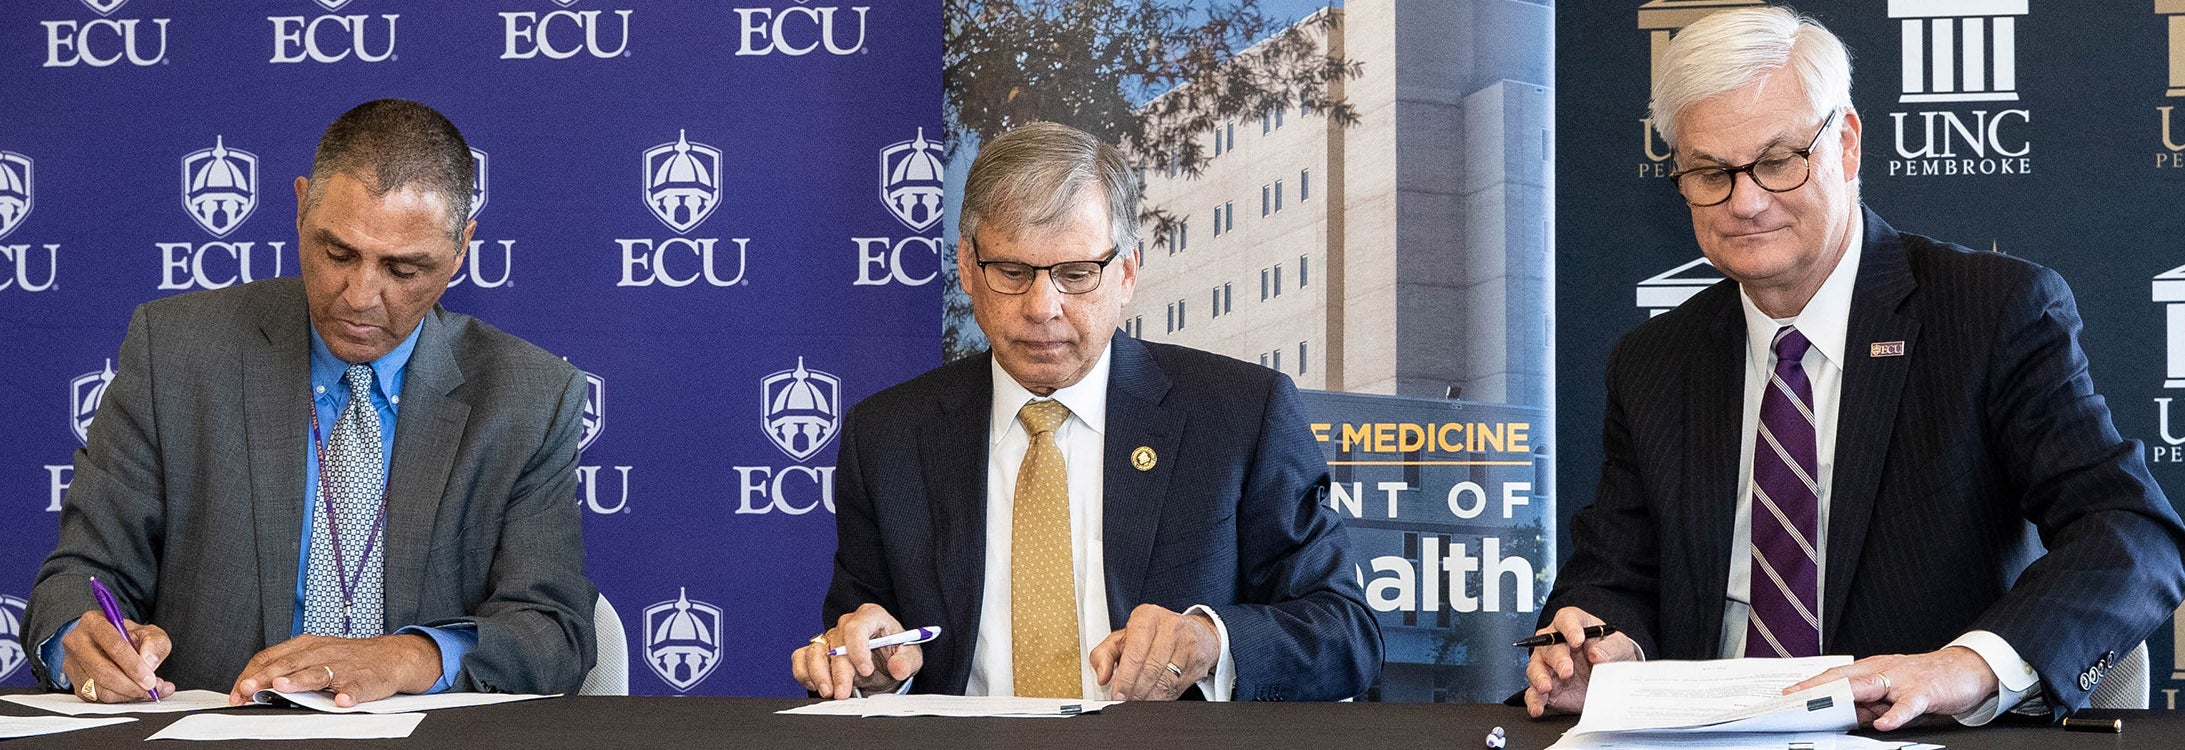 (From left) Dr. Ronny Bell, chair of ECU’s Department of Public Health, UNC-Pembroke Chancellor Dr. Robin Gary Cummings and Dr. Mark Stacy, dean of ECU’s Brody School of Medicine, sign a memorandum of understanding on Dec. 6, 2018 to formalize a public health partnership between the two schools. (Photo by Cliff Hollis)